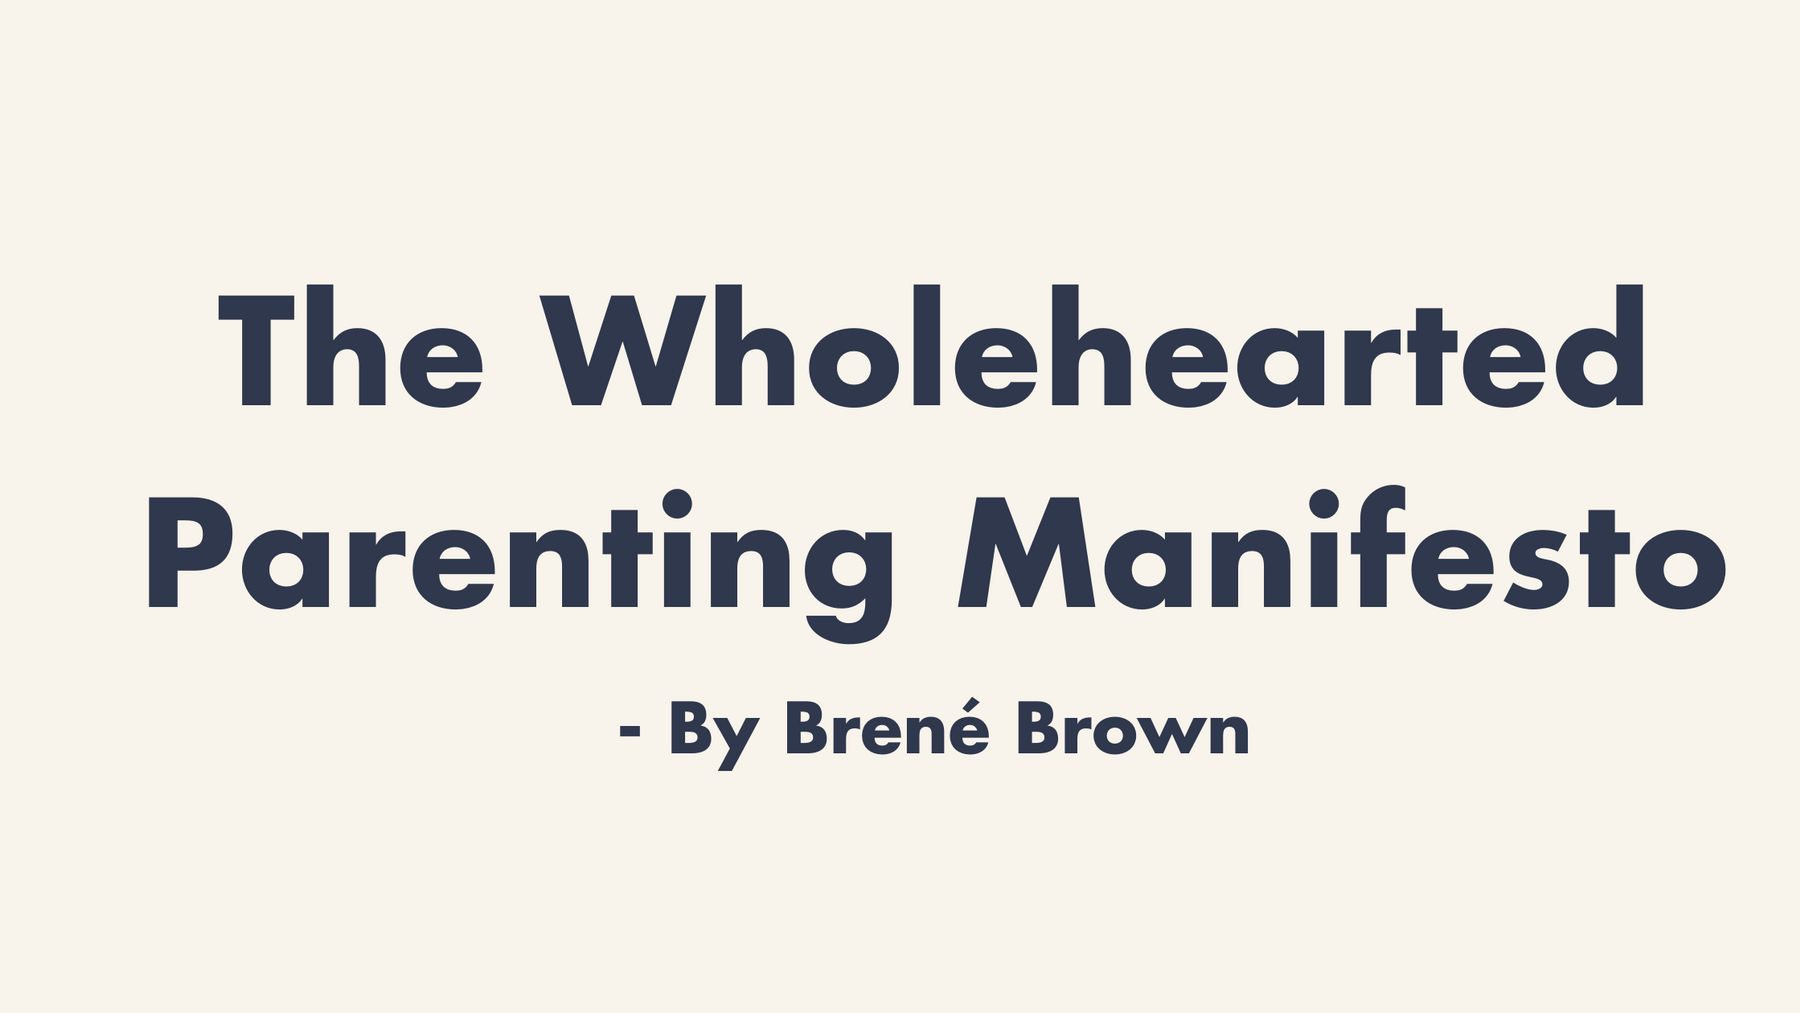 The Wholehearted Parenting Manifesto- By Brené Brown